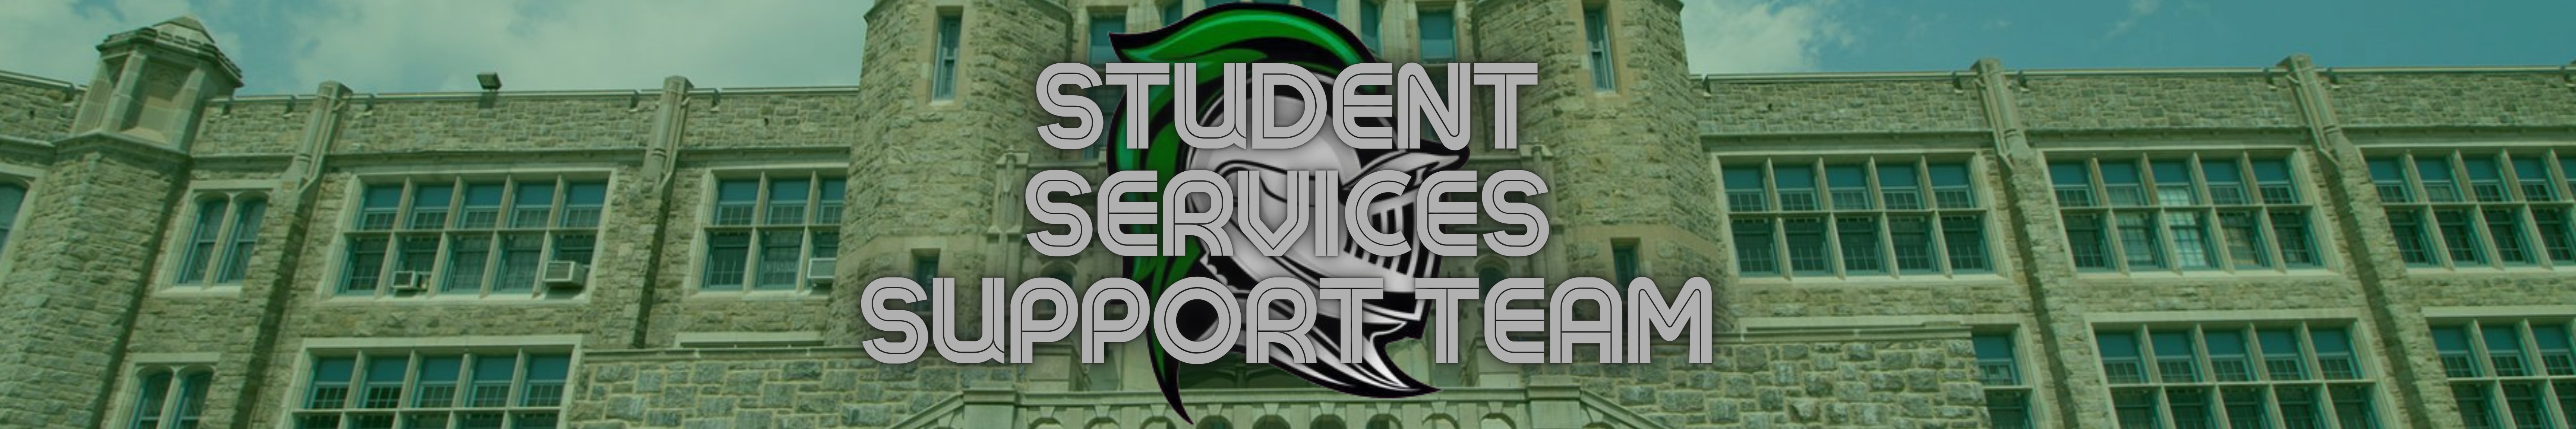 Student Services Support Team banner